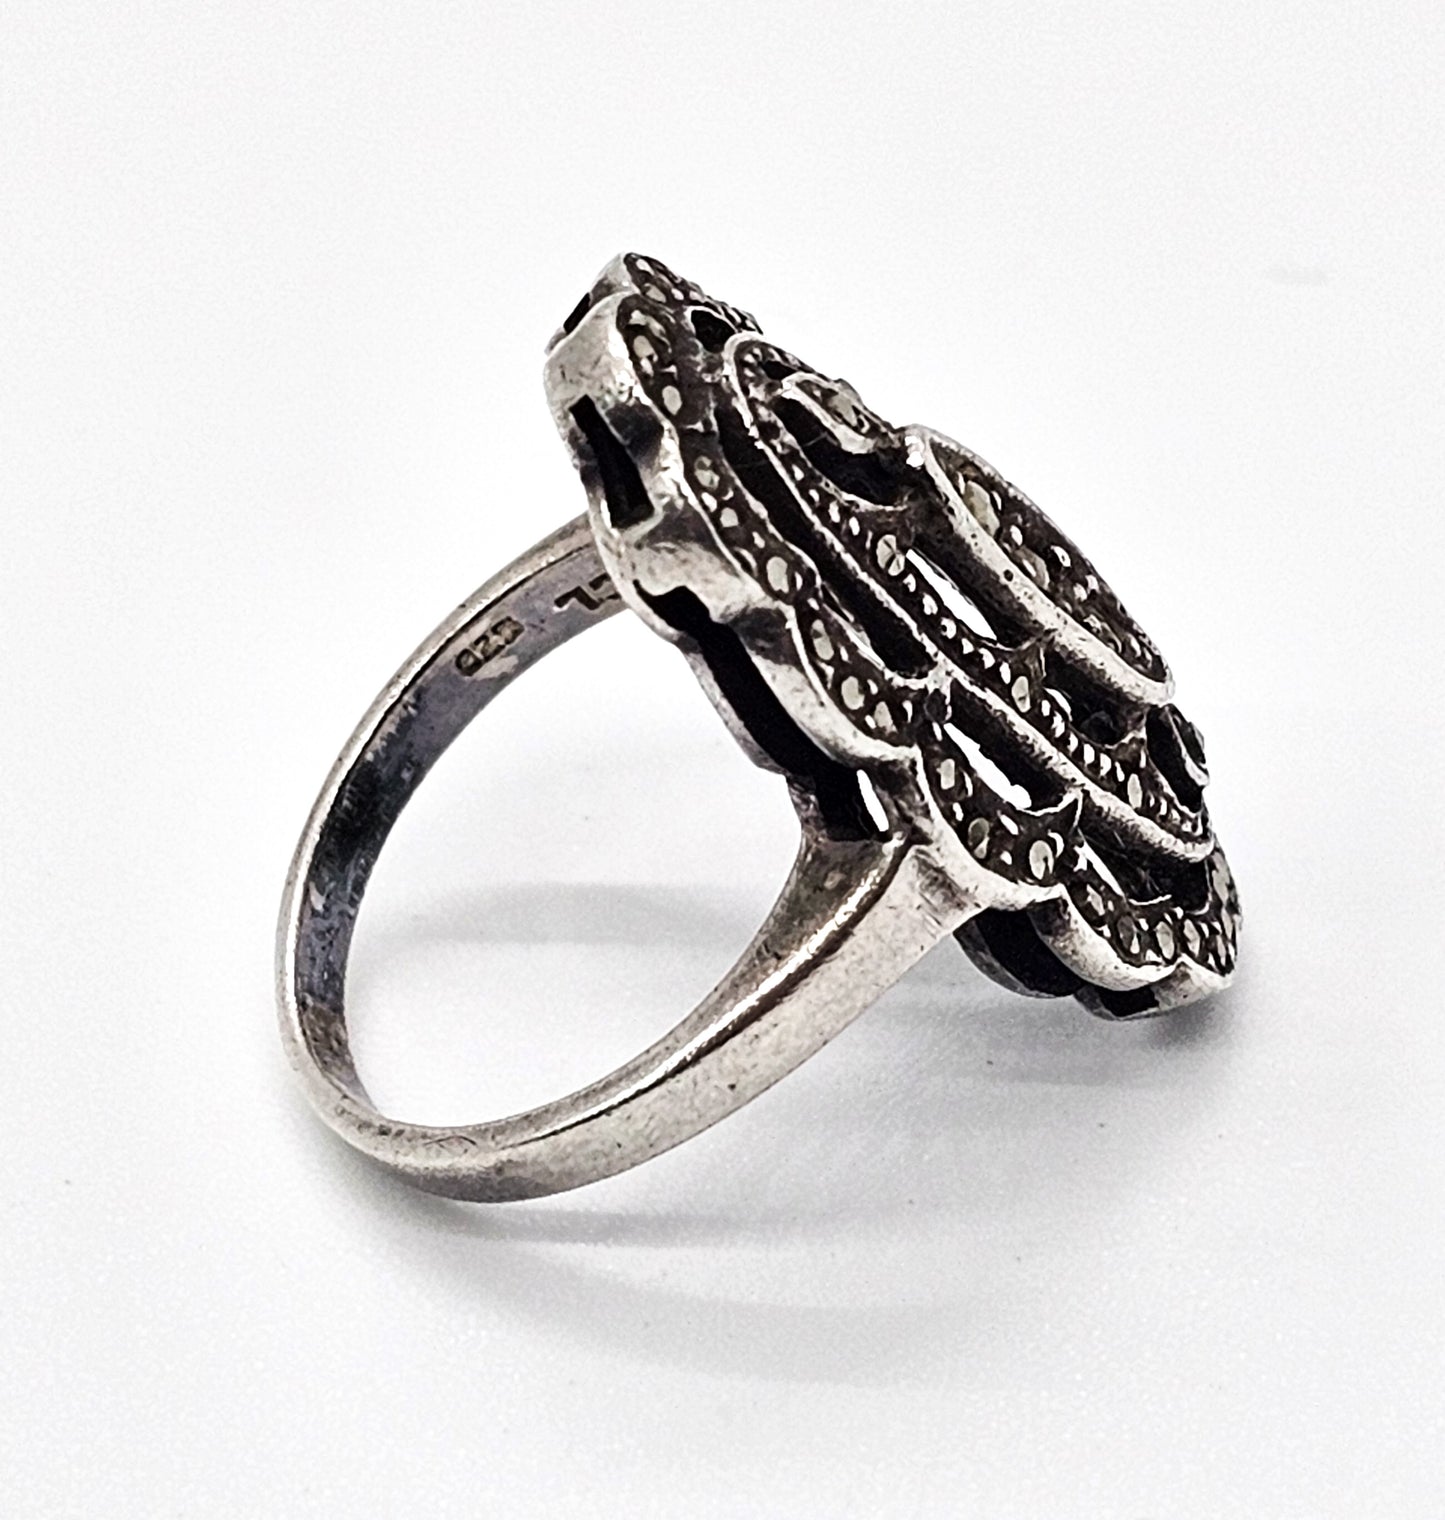 Art Deco style marcasite open work sterling silver vintage filigree ring size 5